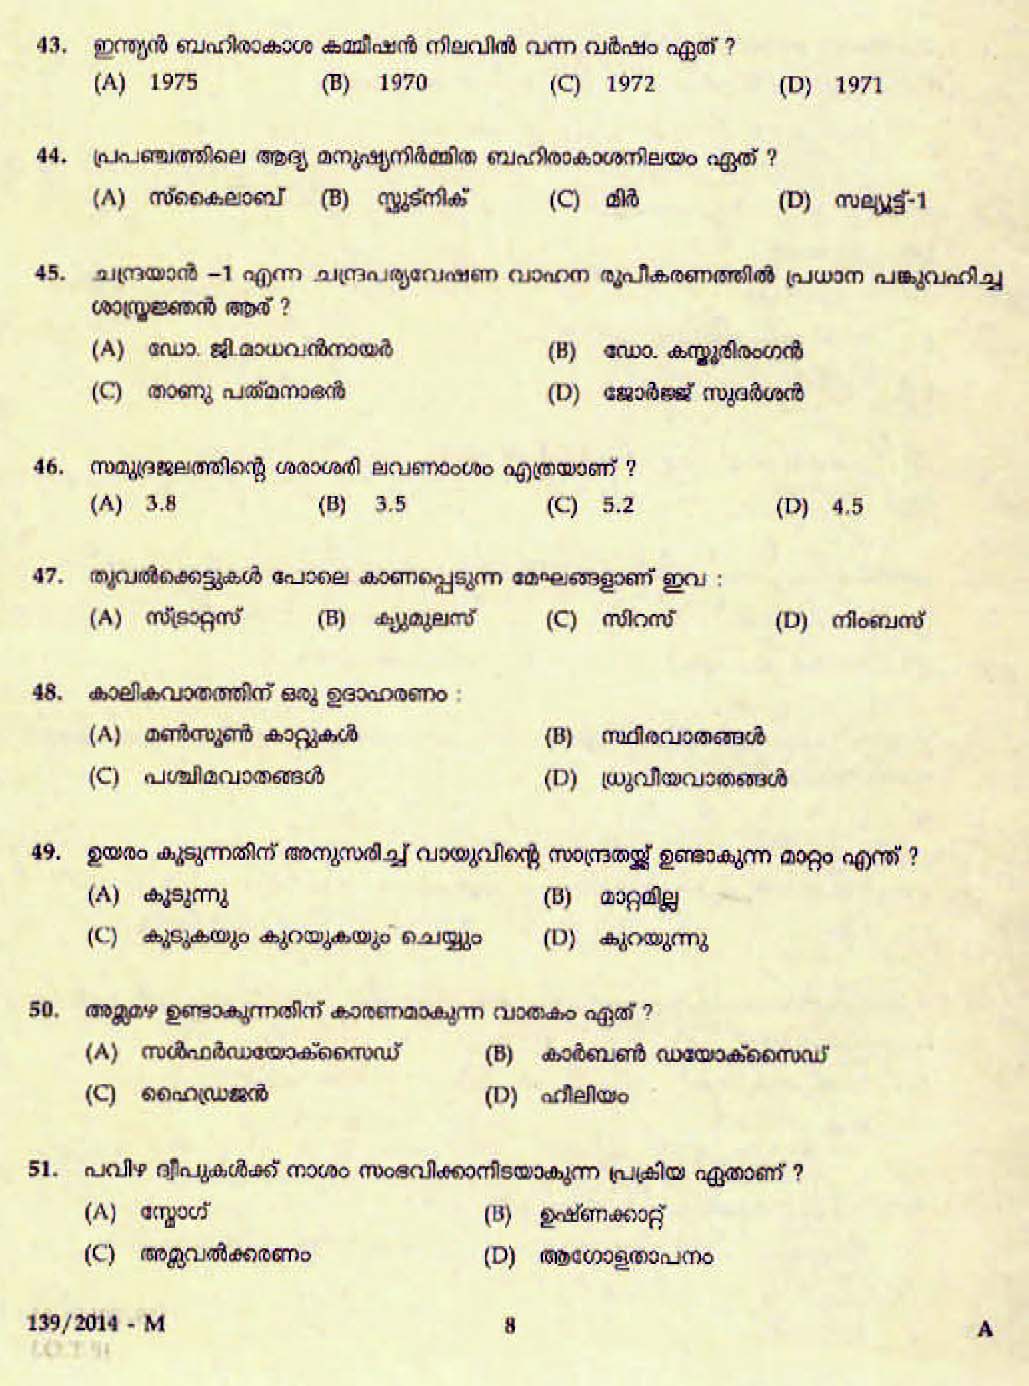 LD Clerk Various Question Paper Malayalam 2014 Paper Code 1392014 M 6